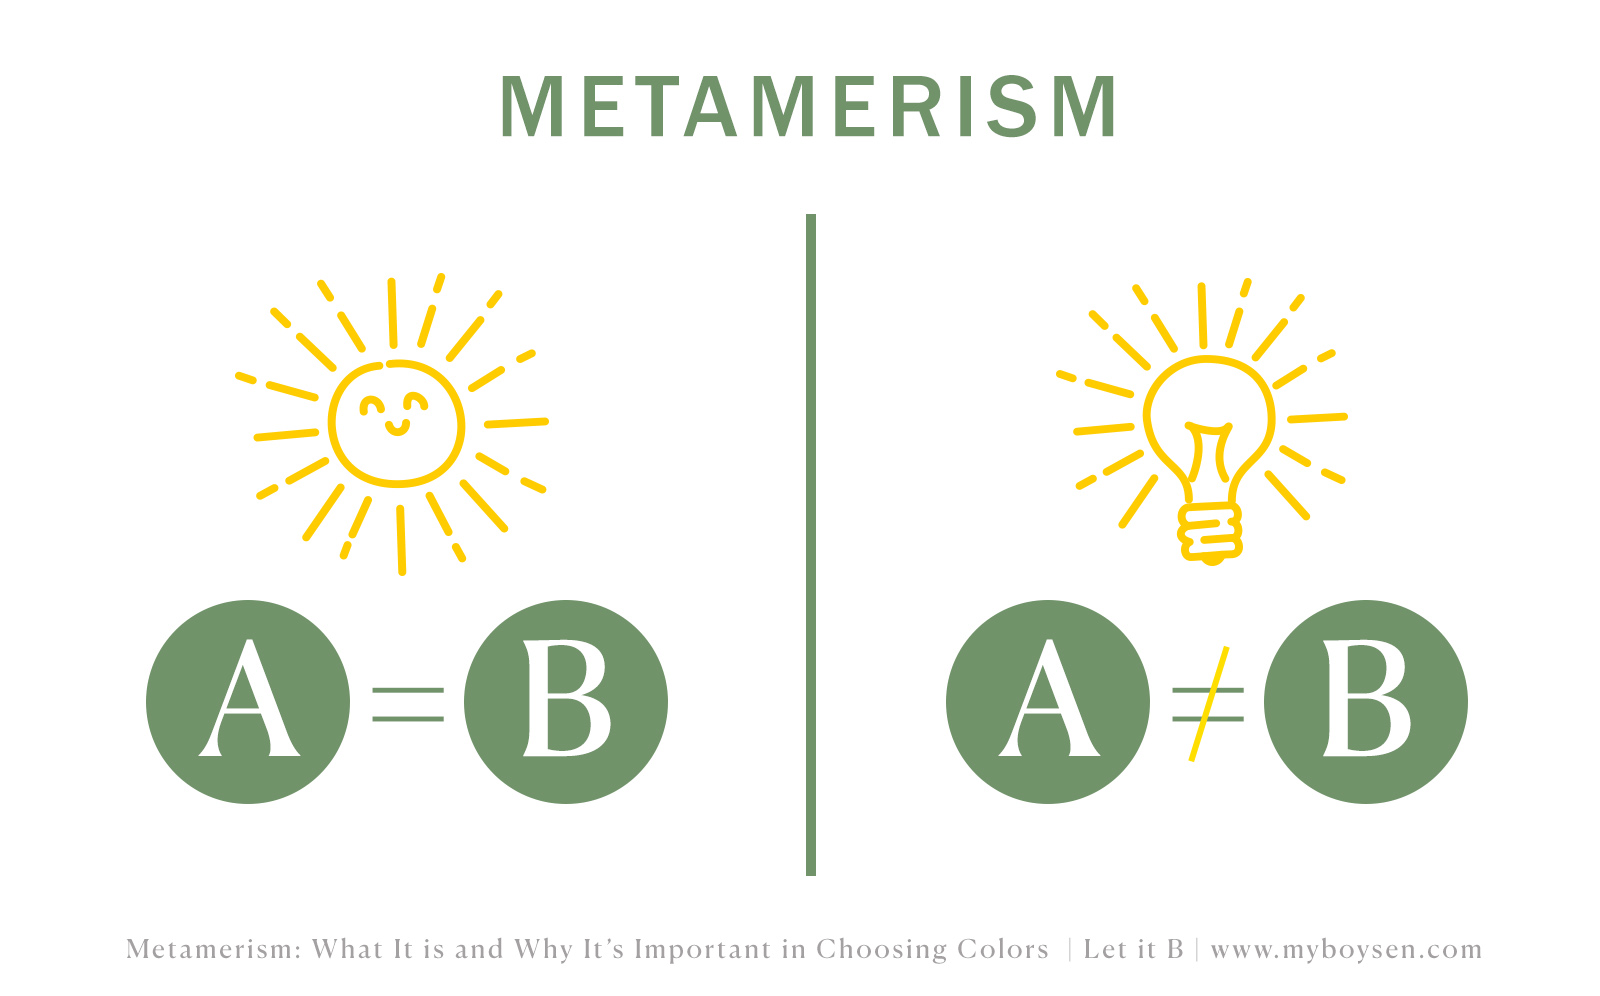 Metamerism: What It is and Why It's Important in Choosing Colors | MyBoysen